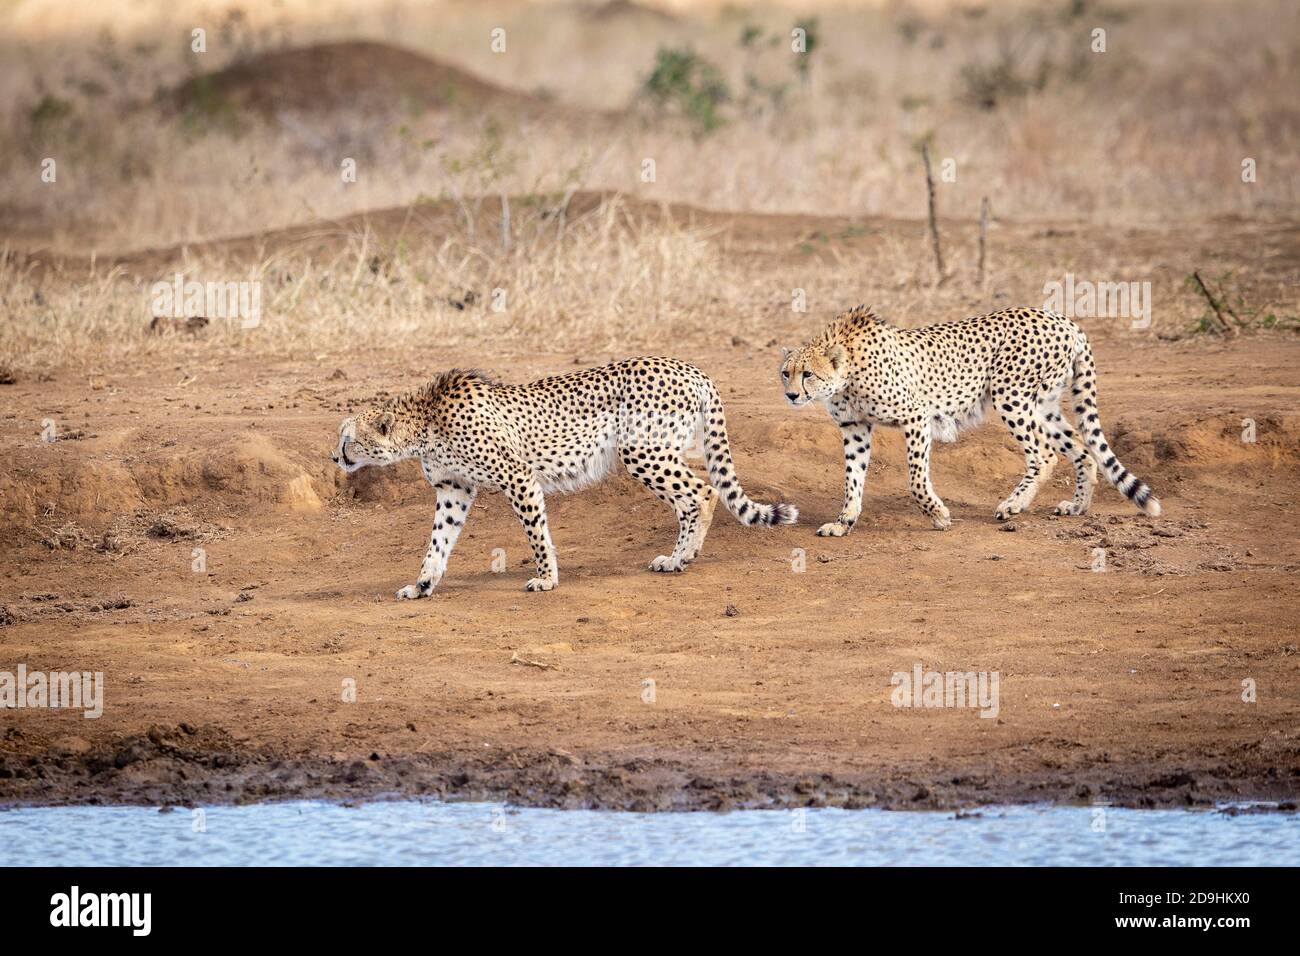 Two adult cheetahs walking on dry soil at the edge of water in Kruger Park in South Africa Stock Photo